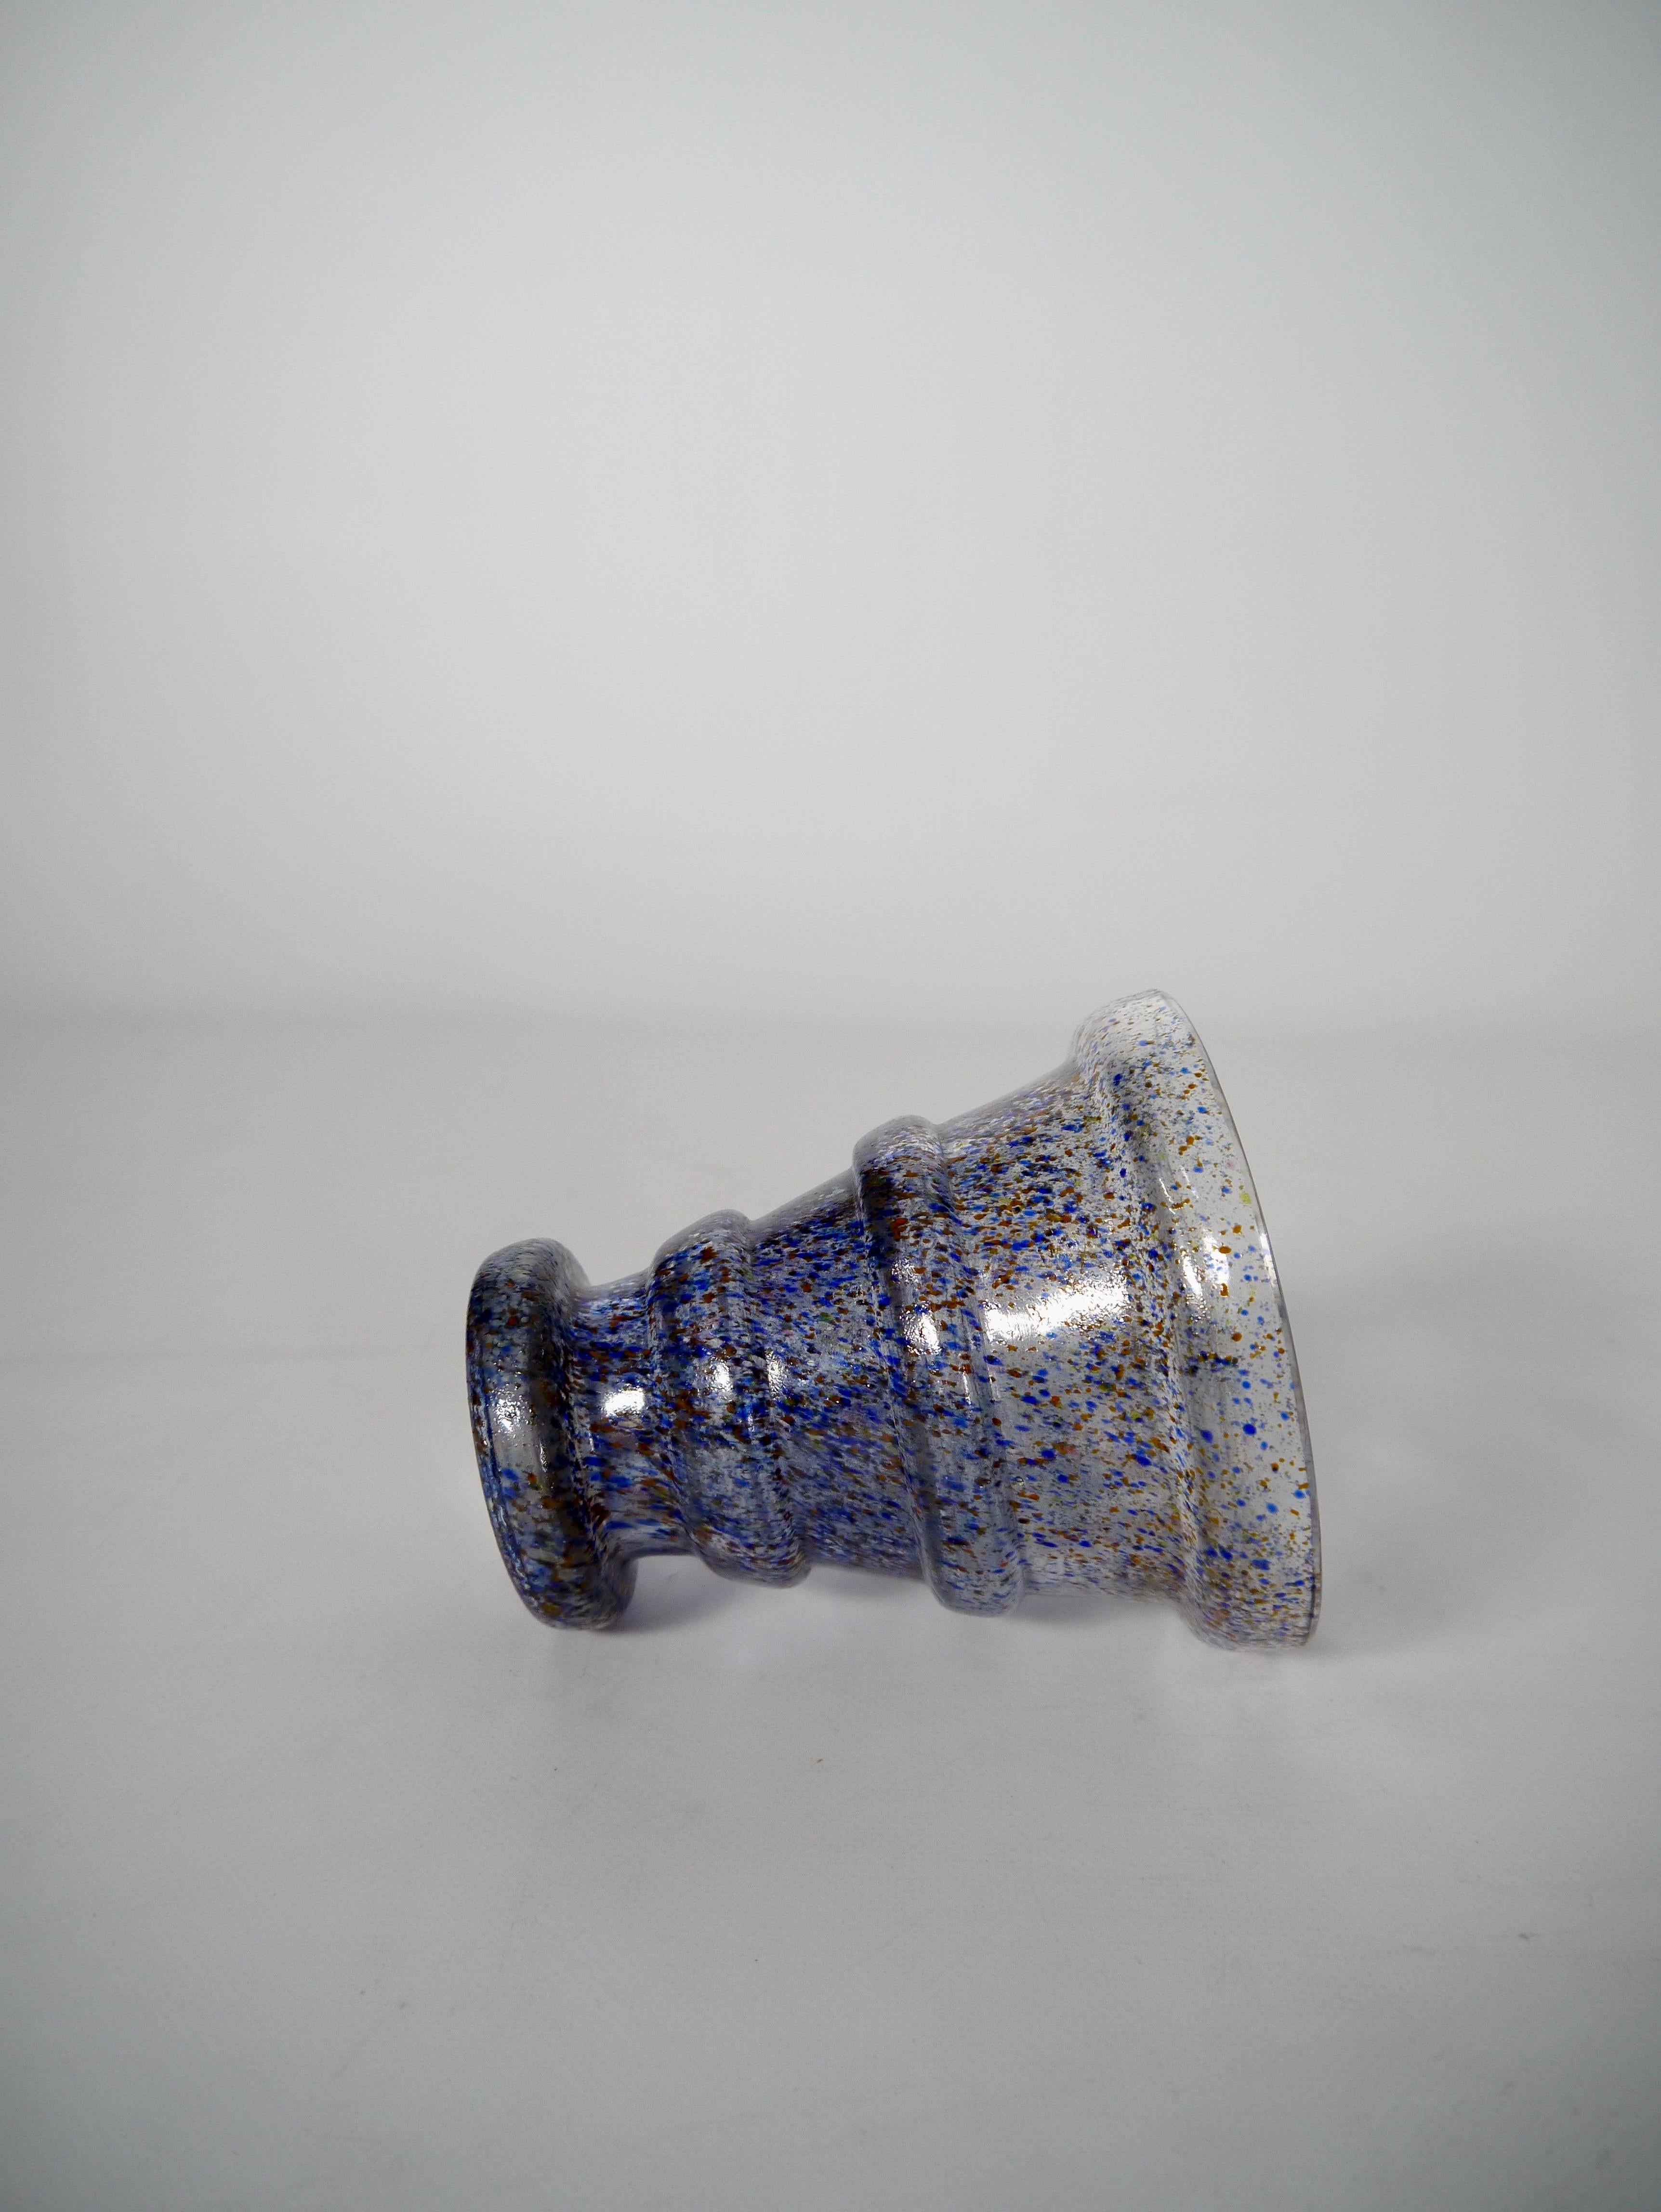 Swedish Early Modernist Glass Vase by Sven X:et Erixson for Kosta, Sweden, 1930s For Sale